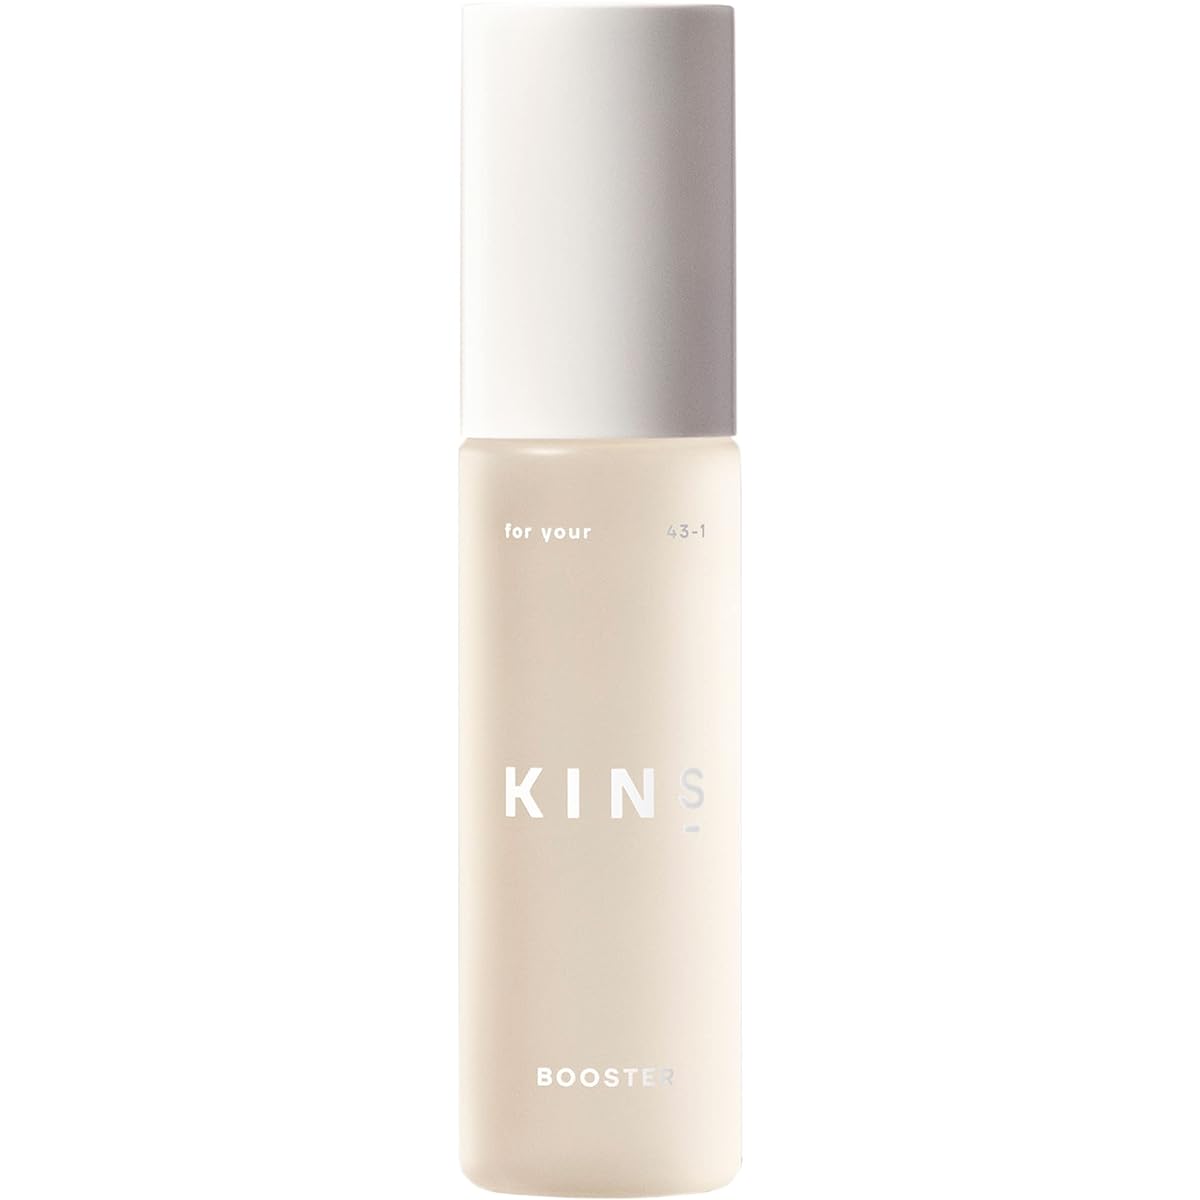 KINS Booster Lotion, Serum, Refreshing, Bacterial Care, Oily Skin, Mixed Skin, Normal Skin, Pore Care